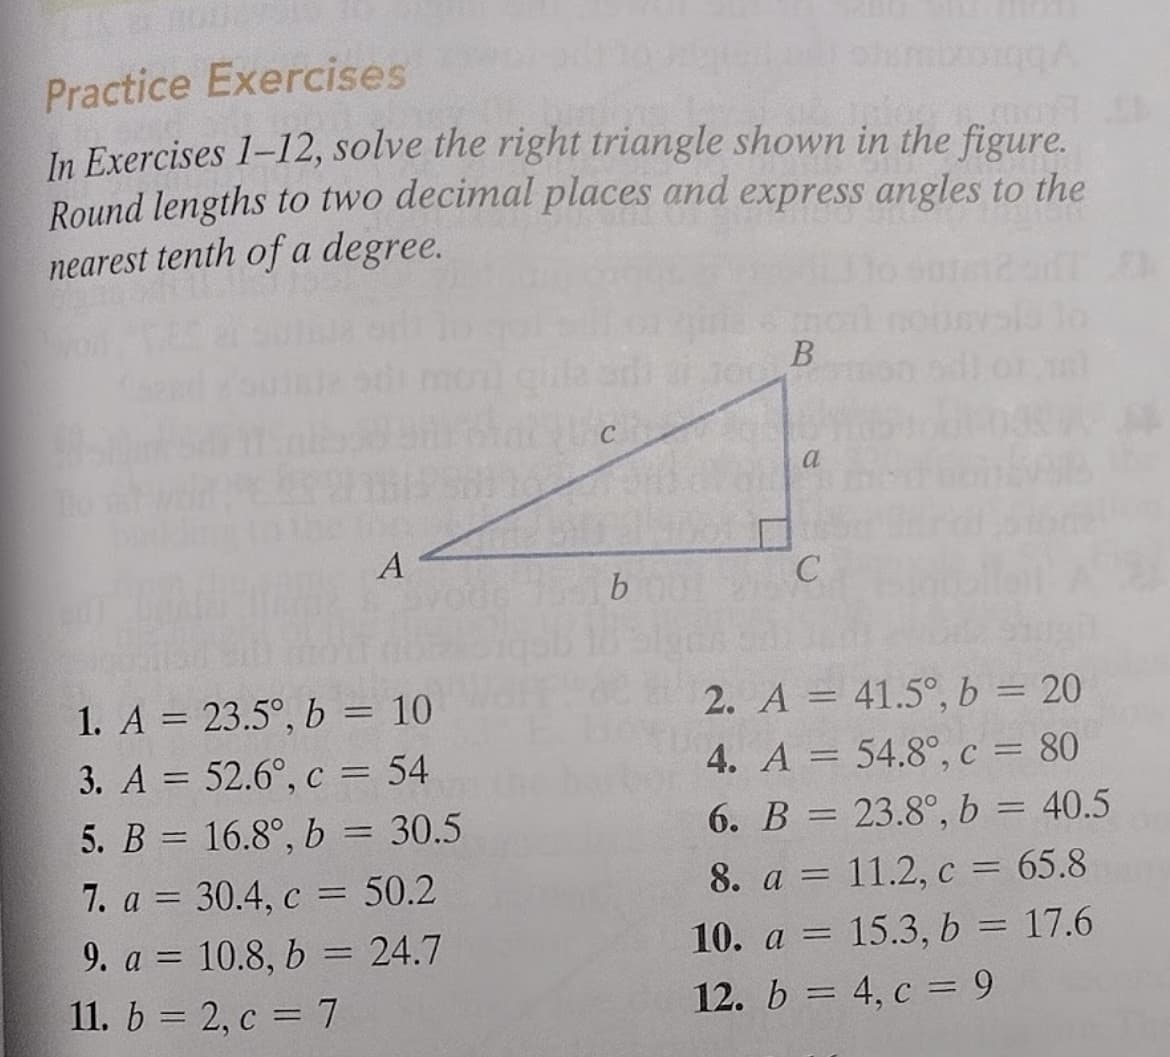 Practice Exercises
In Exercises 1-12, solve the right triangle shown in the figure.
Round lengths to two decimal places and express angles to the
nearest tenth of a degree.
a
A
1. A = 23.5°, b = 10
2. A = 41.5°, b = 20
3. A = 52.6°, c = 54
4. A = 54.8°, c = 80
%3D
6. B = 23.8°, b = 40.5
5. B = 16.8°, b = 30.5
7. a = 30.4, c = 50.2
%3D
8. a = 11.2, c = 65.8
9. a = 10.8, b = 24.7
10. a = 15.3, b = 17.6
%3D
11. b = 2, c = 7
12. b = 4, c = 9
